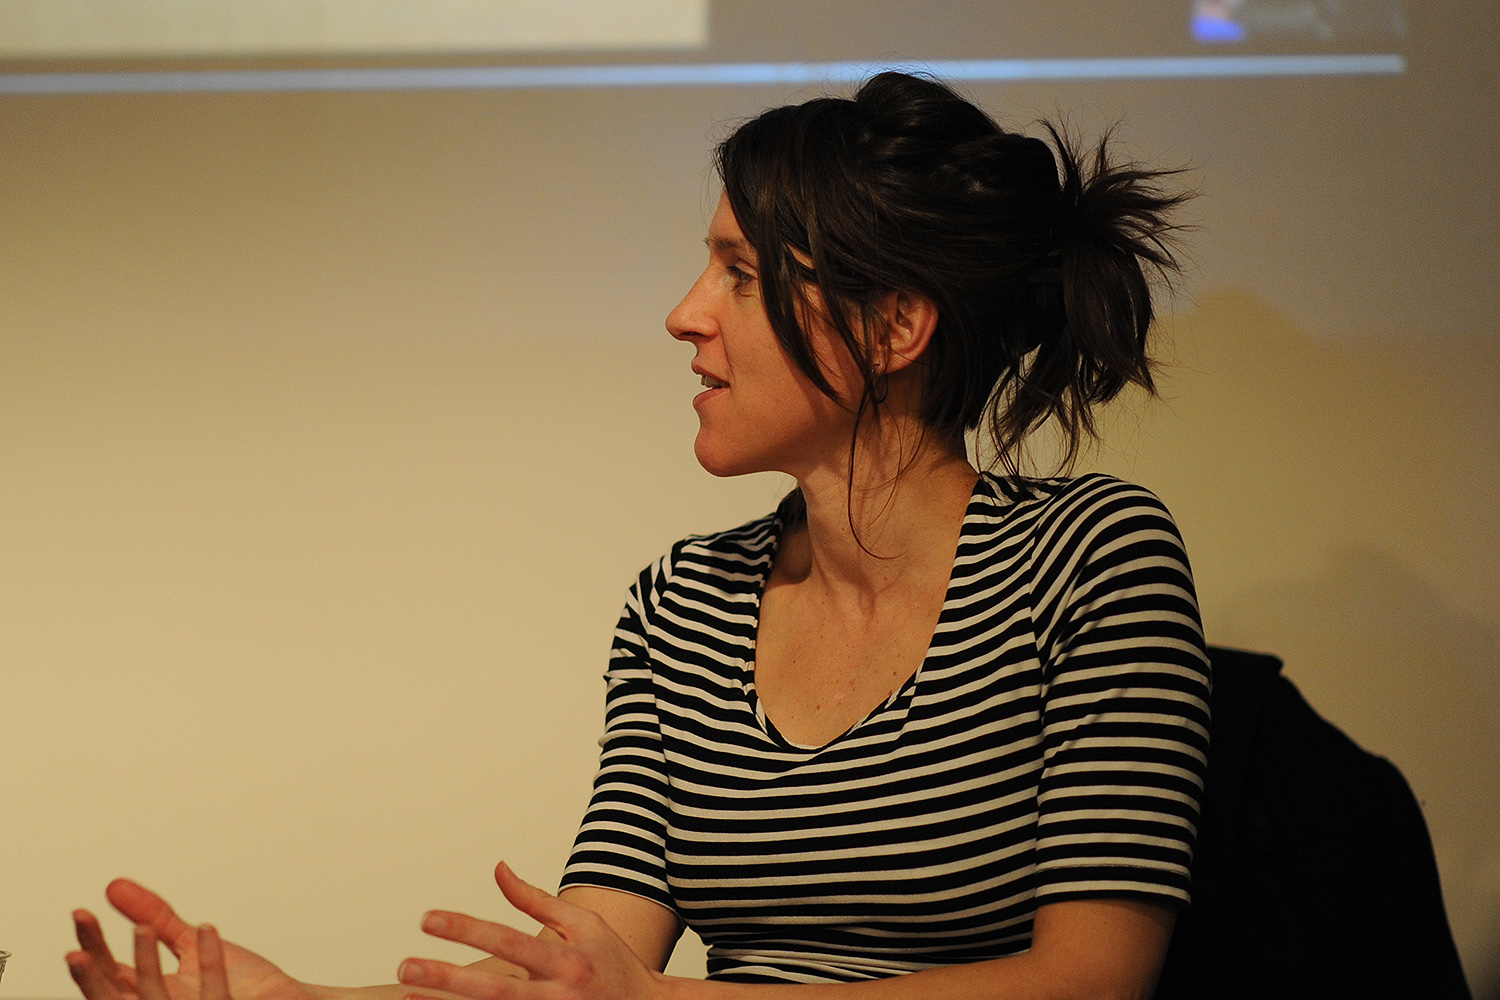 The event was moderated by Claire Grace, assistant professor of art.